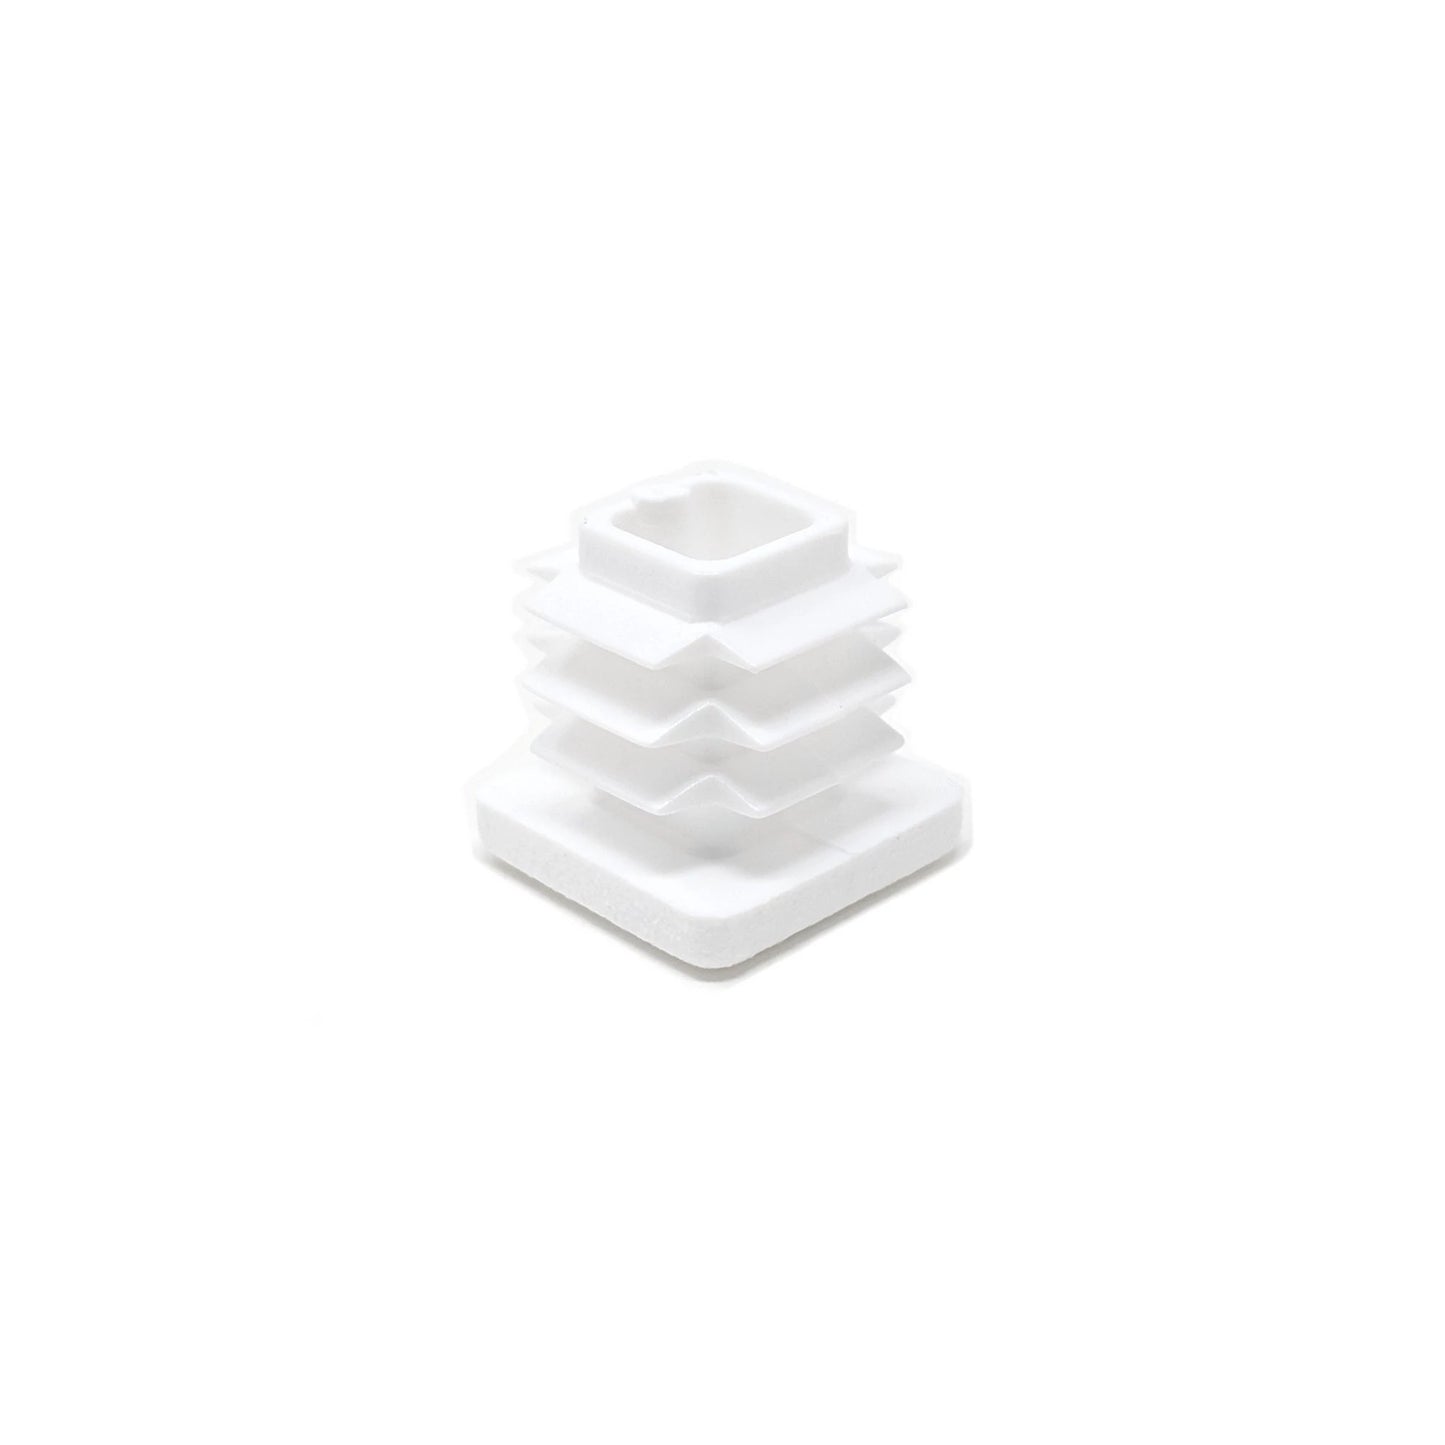 Square Tube Inserts 15mm x 15mm White | Made in Germany | Keay Vital Parts - Keay Vital Parts